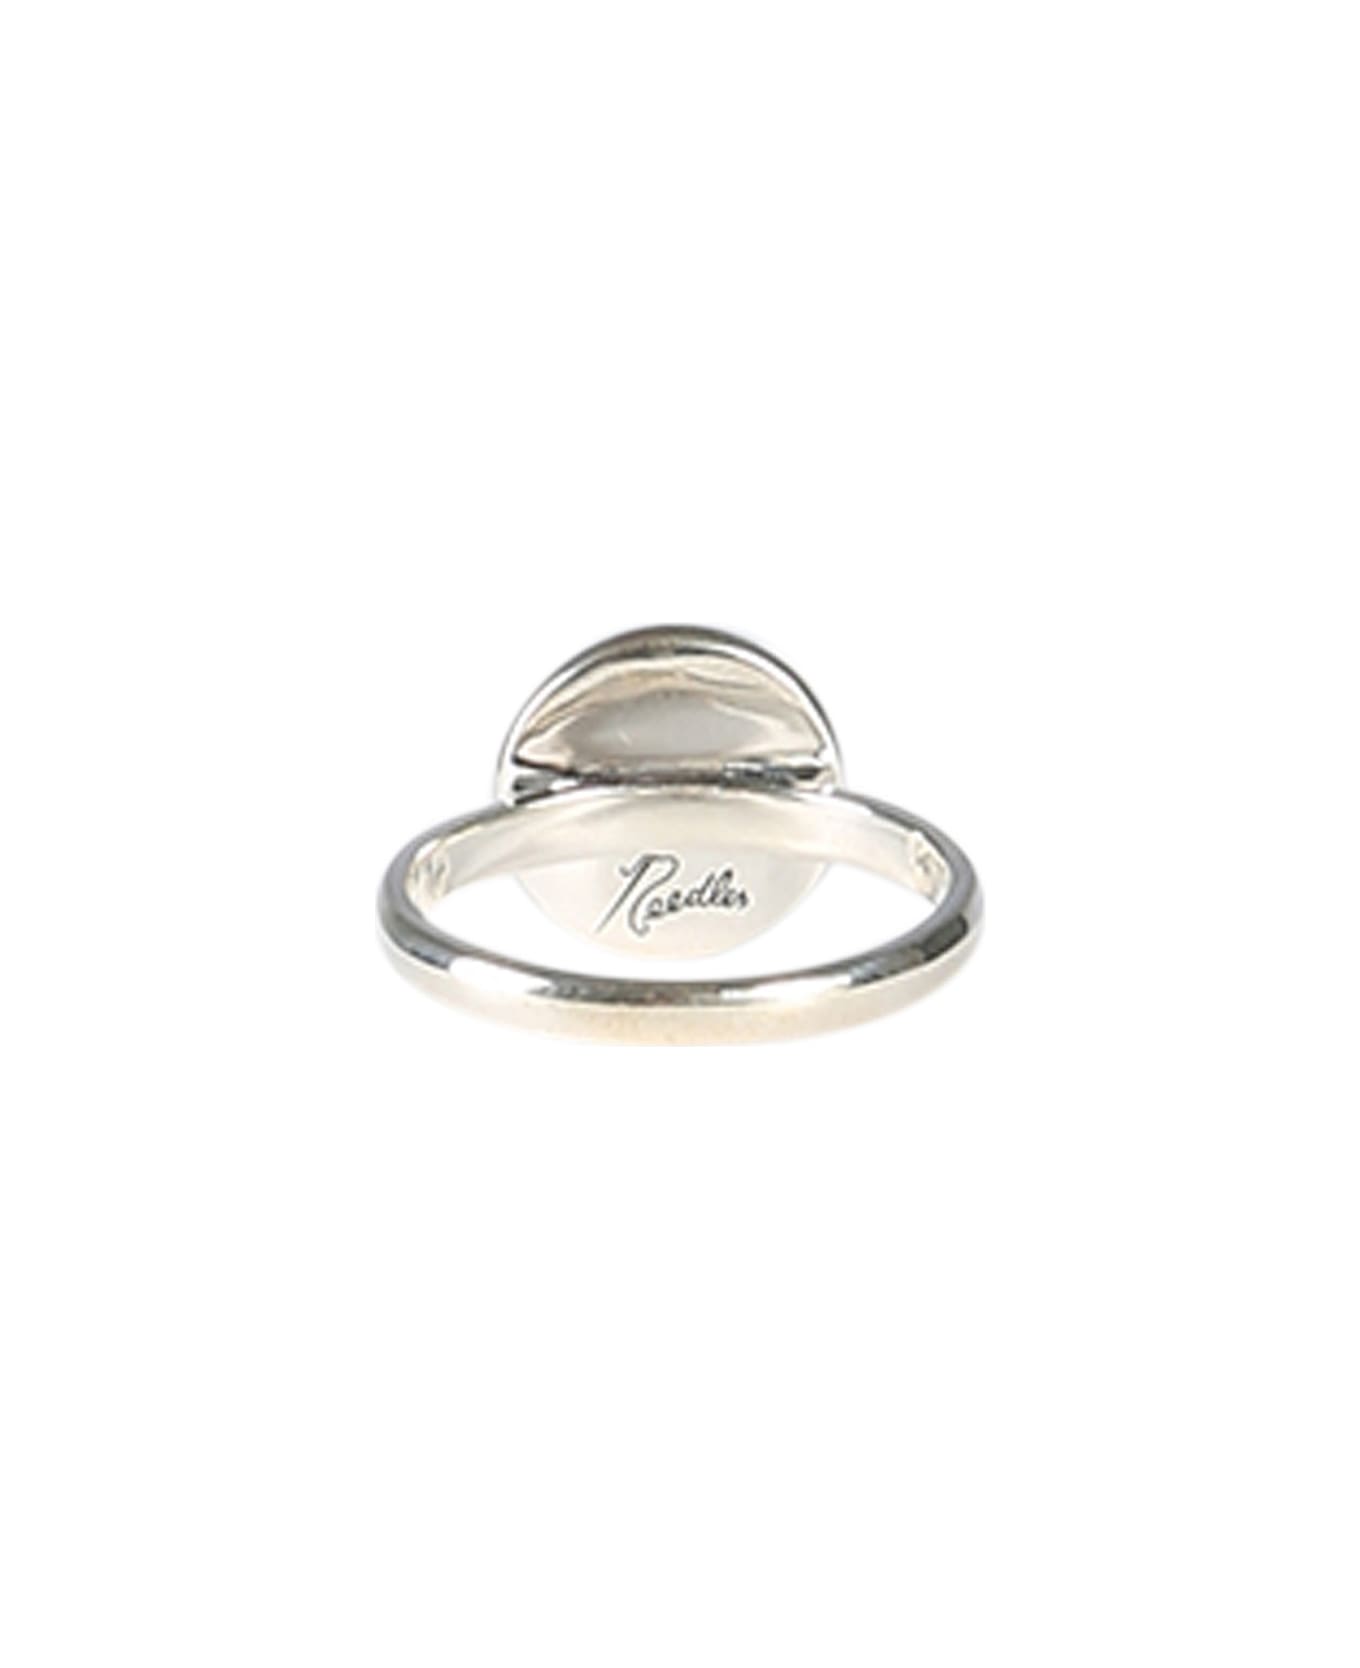 Needles Peace Ring - SILVER